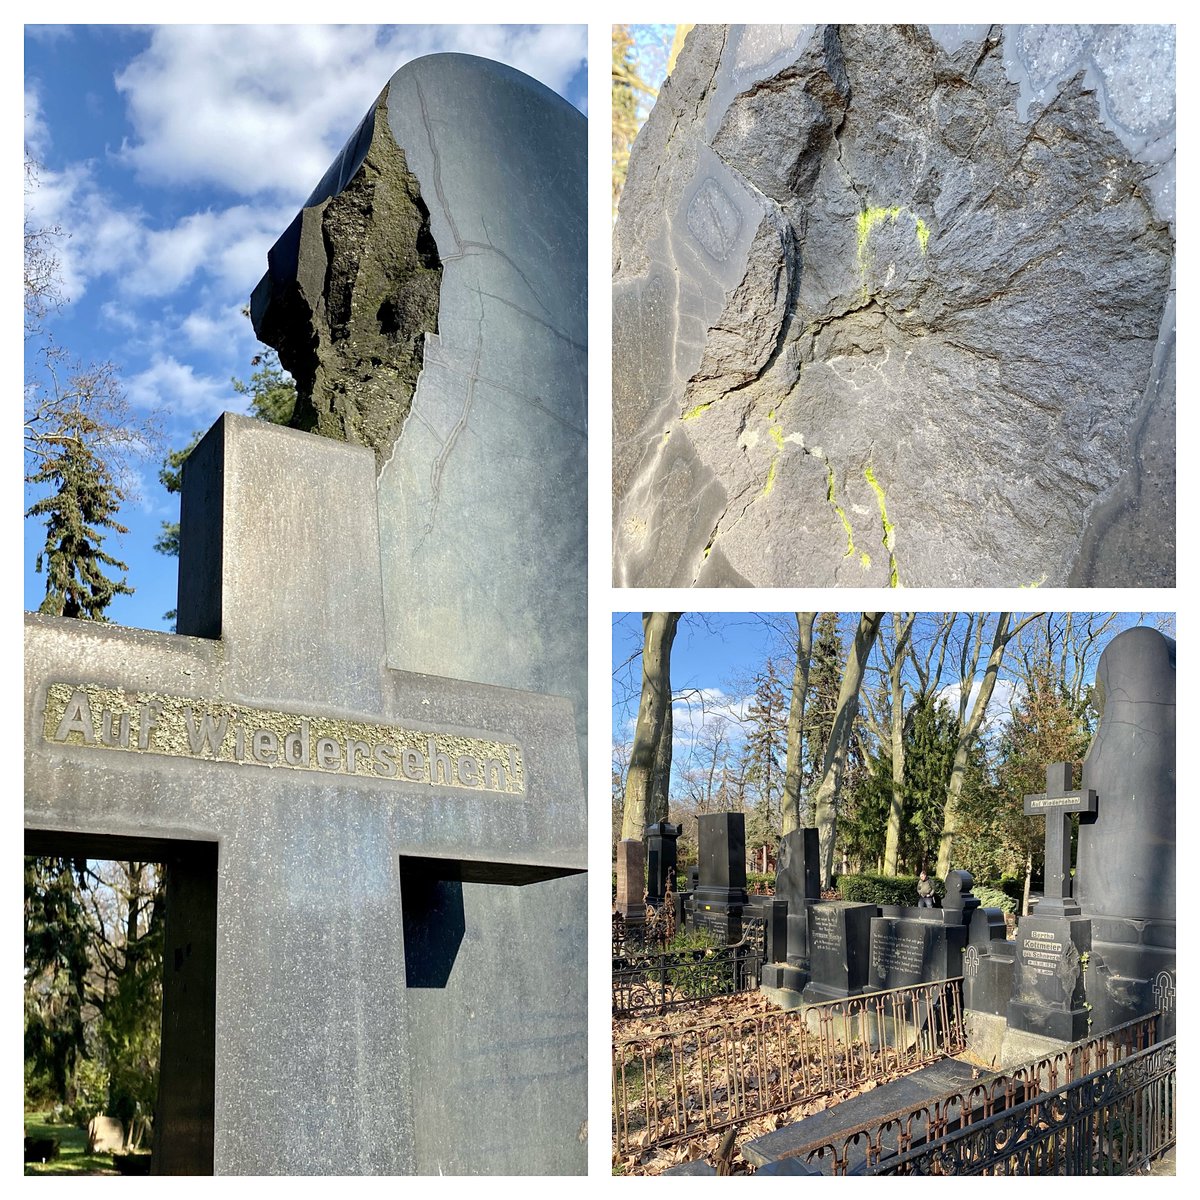 Signs of a fierce fight on a several gravestones and monuments near the entrance of St. Thomas Cemetery on Hermannstr. (Berlin-Neukölln), probably from 25 April 1945. The damage shown in one photo (top-right) has a diameter of c. 25 cms (ten inches).